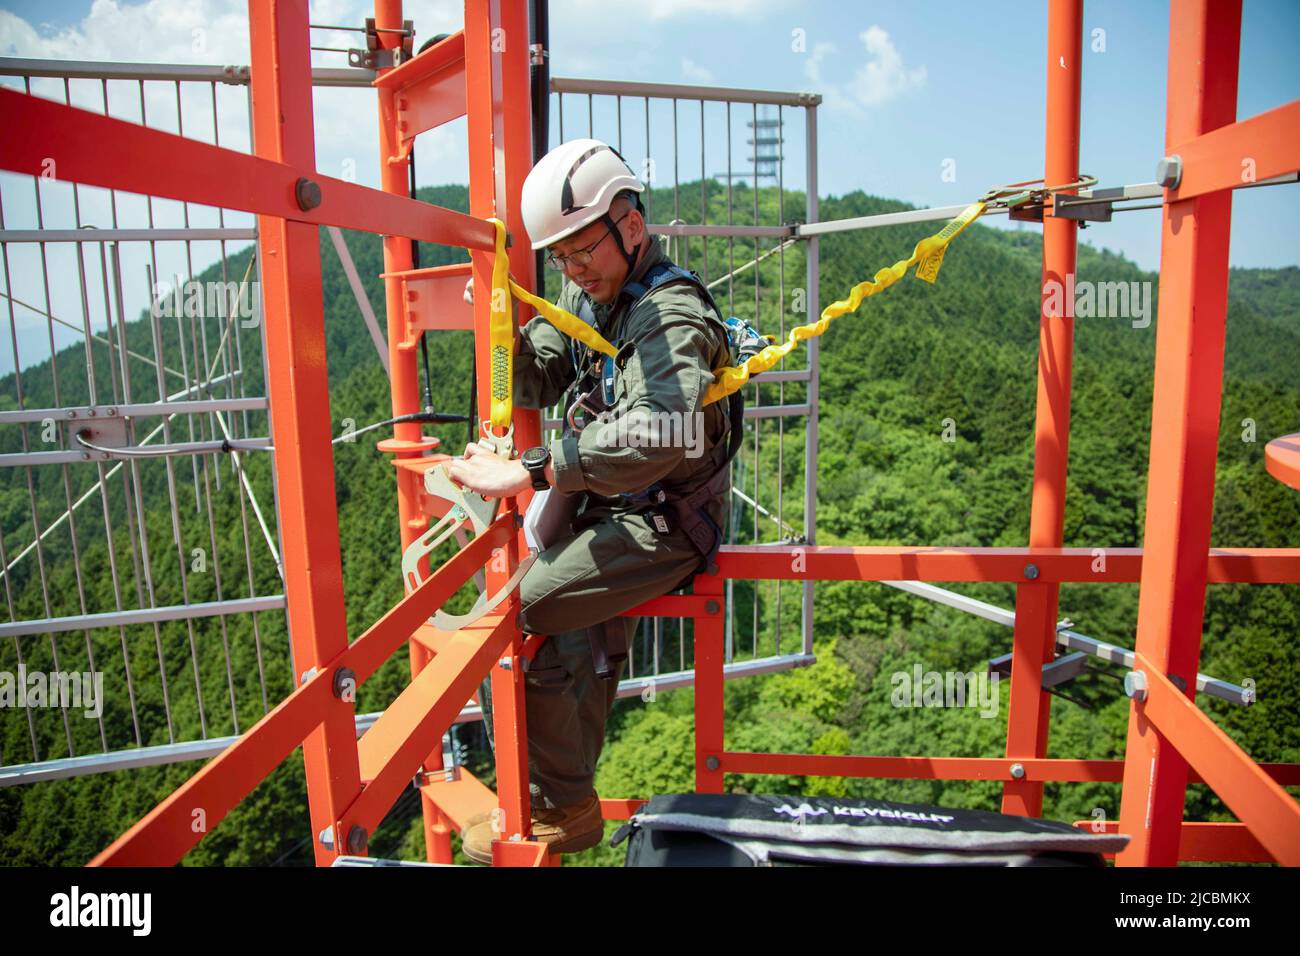 Iwakuni, Yamaguchi, Japan. 25th May, 2022. U.S. Marine Corps Lance Cpl. Xinxin Dai, an air traffic control communications technician, attaches a harness to a radio tower in Yamaguchi Prefecture, Japan, May 17, 2022. Marine Corps Air Station Iwakuni's radio towers are maintained weekly because of their vital role in the communication and safety between several units at the air station. Due to the geographic scope of the Indo-Pacific Command area of responsibility MCAS Iwakuni serves as a vital link between multiple countries in the Western Pacific theater. (Credit Image: © U.S. Marines/ZUMA P Stock Photo